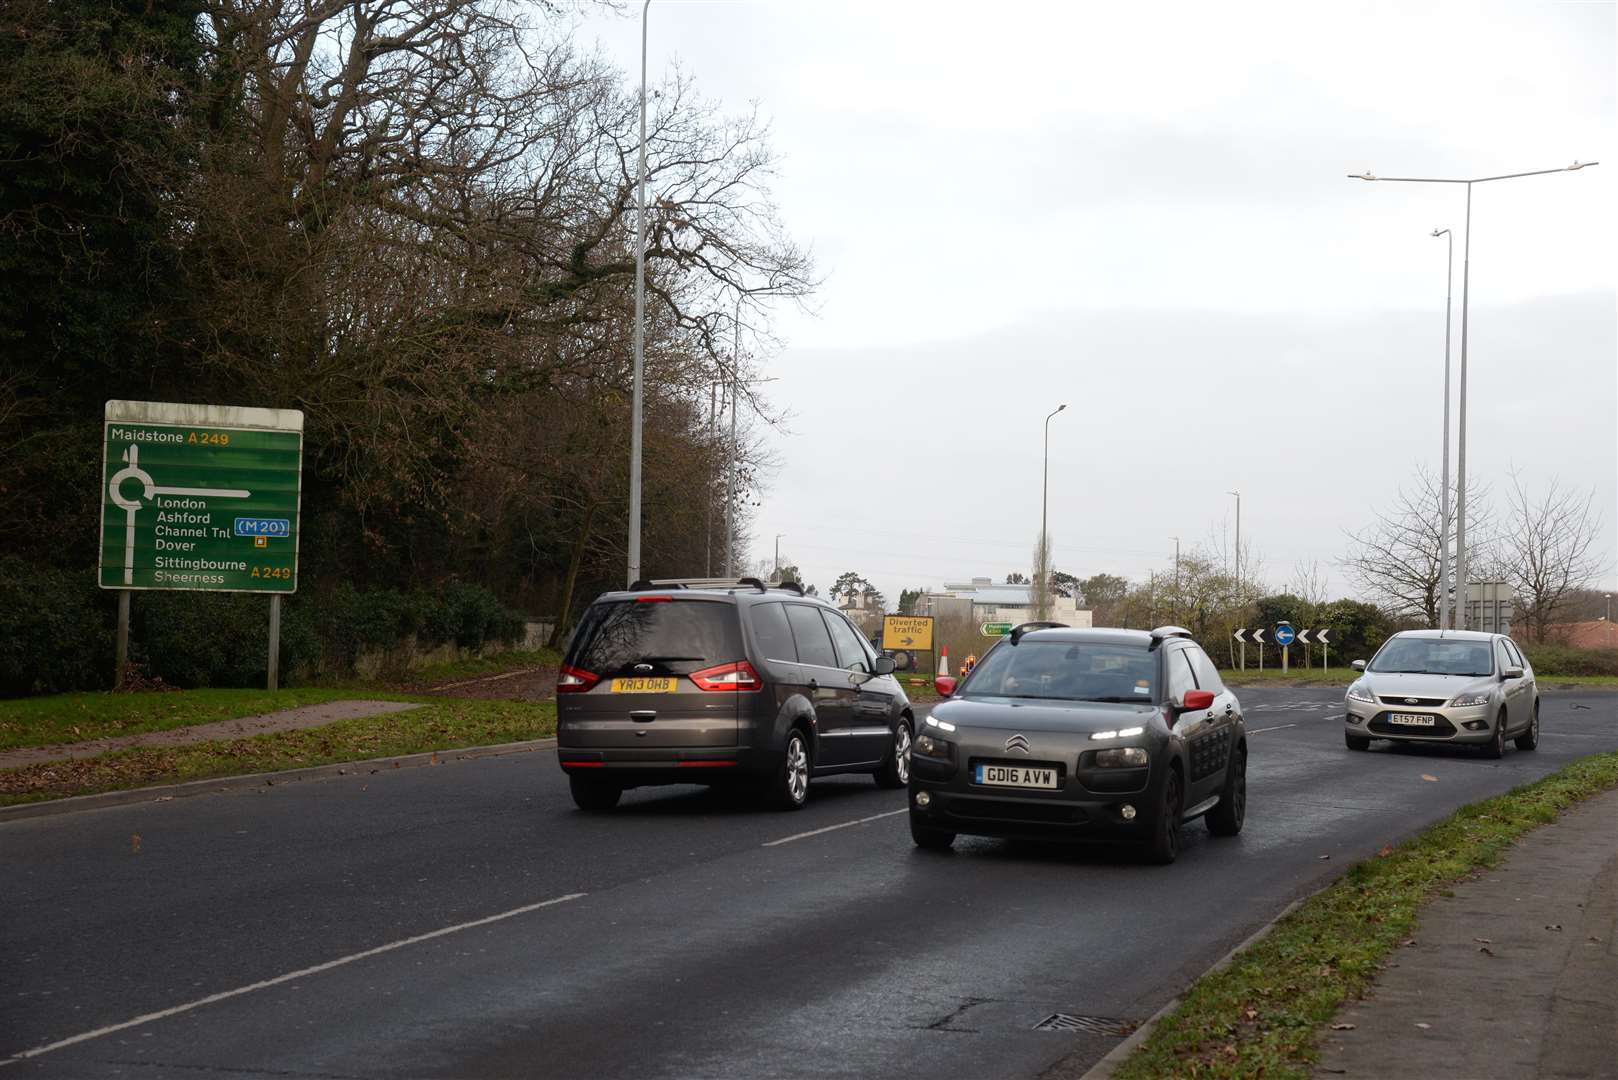 The A249 and Bearsted Road roundabout